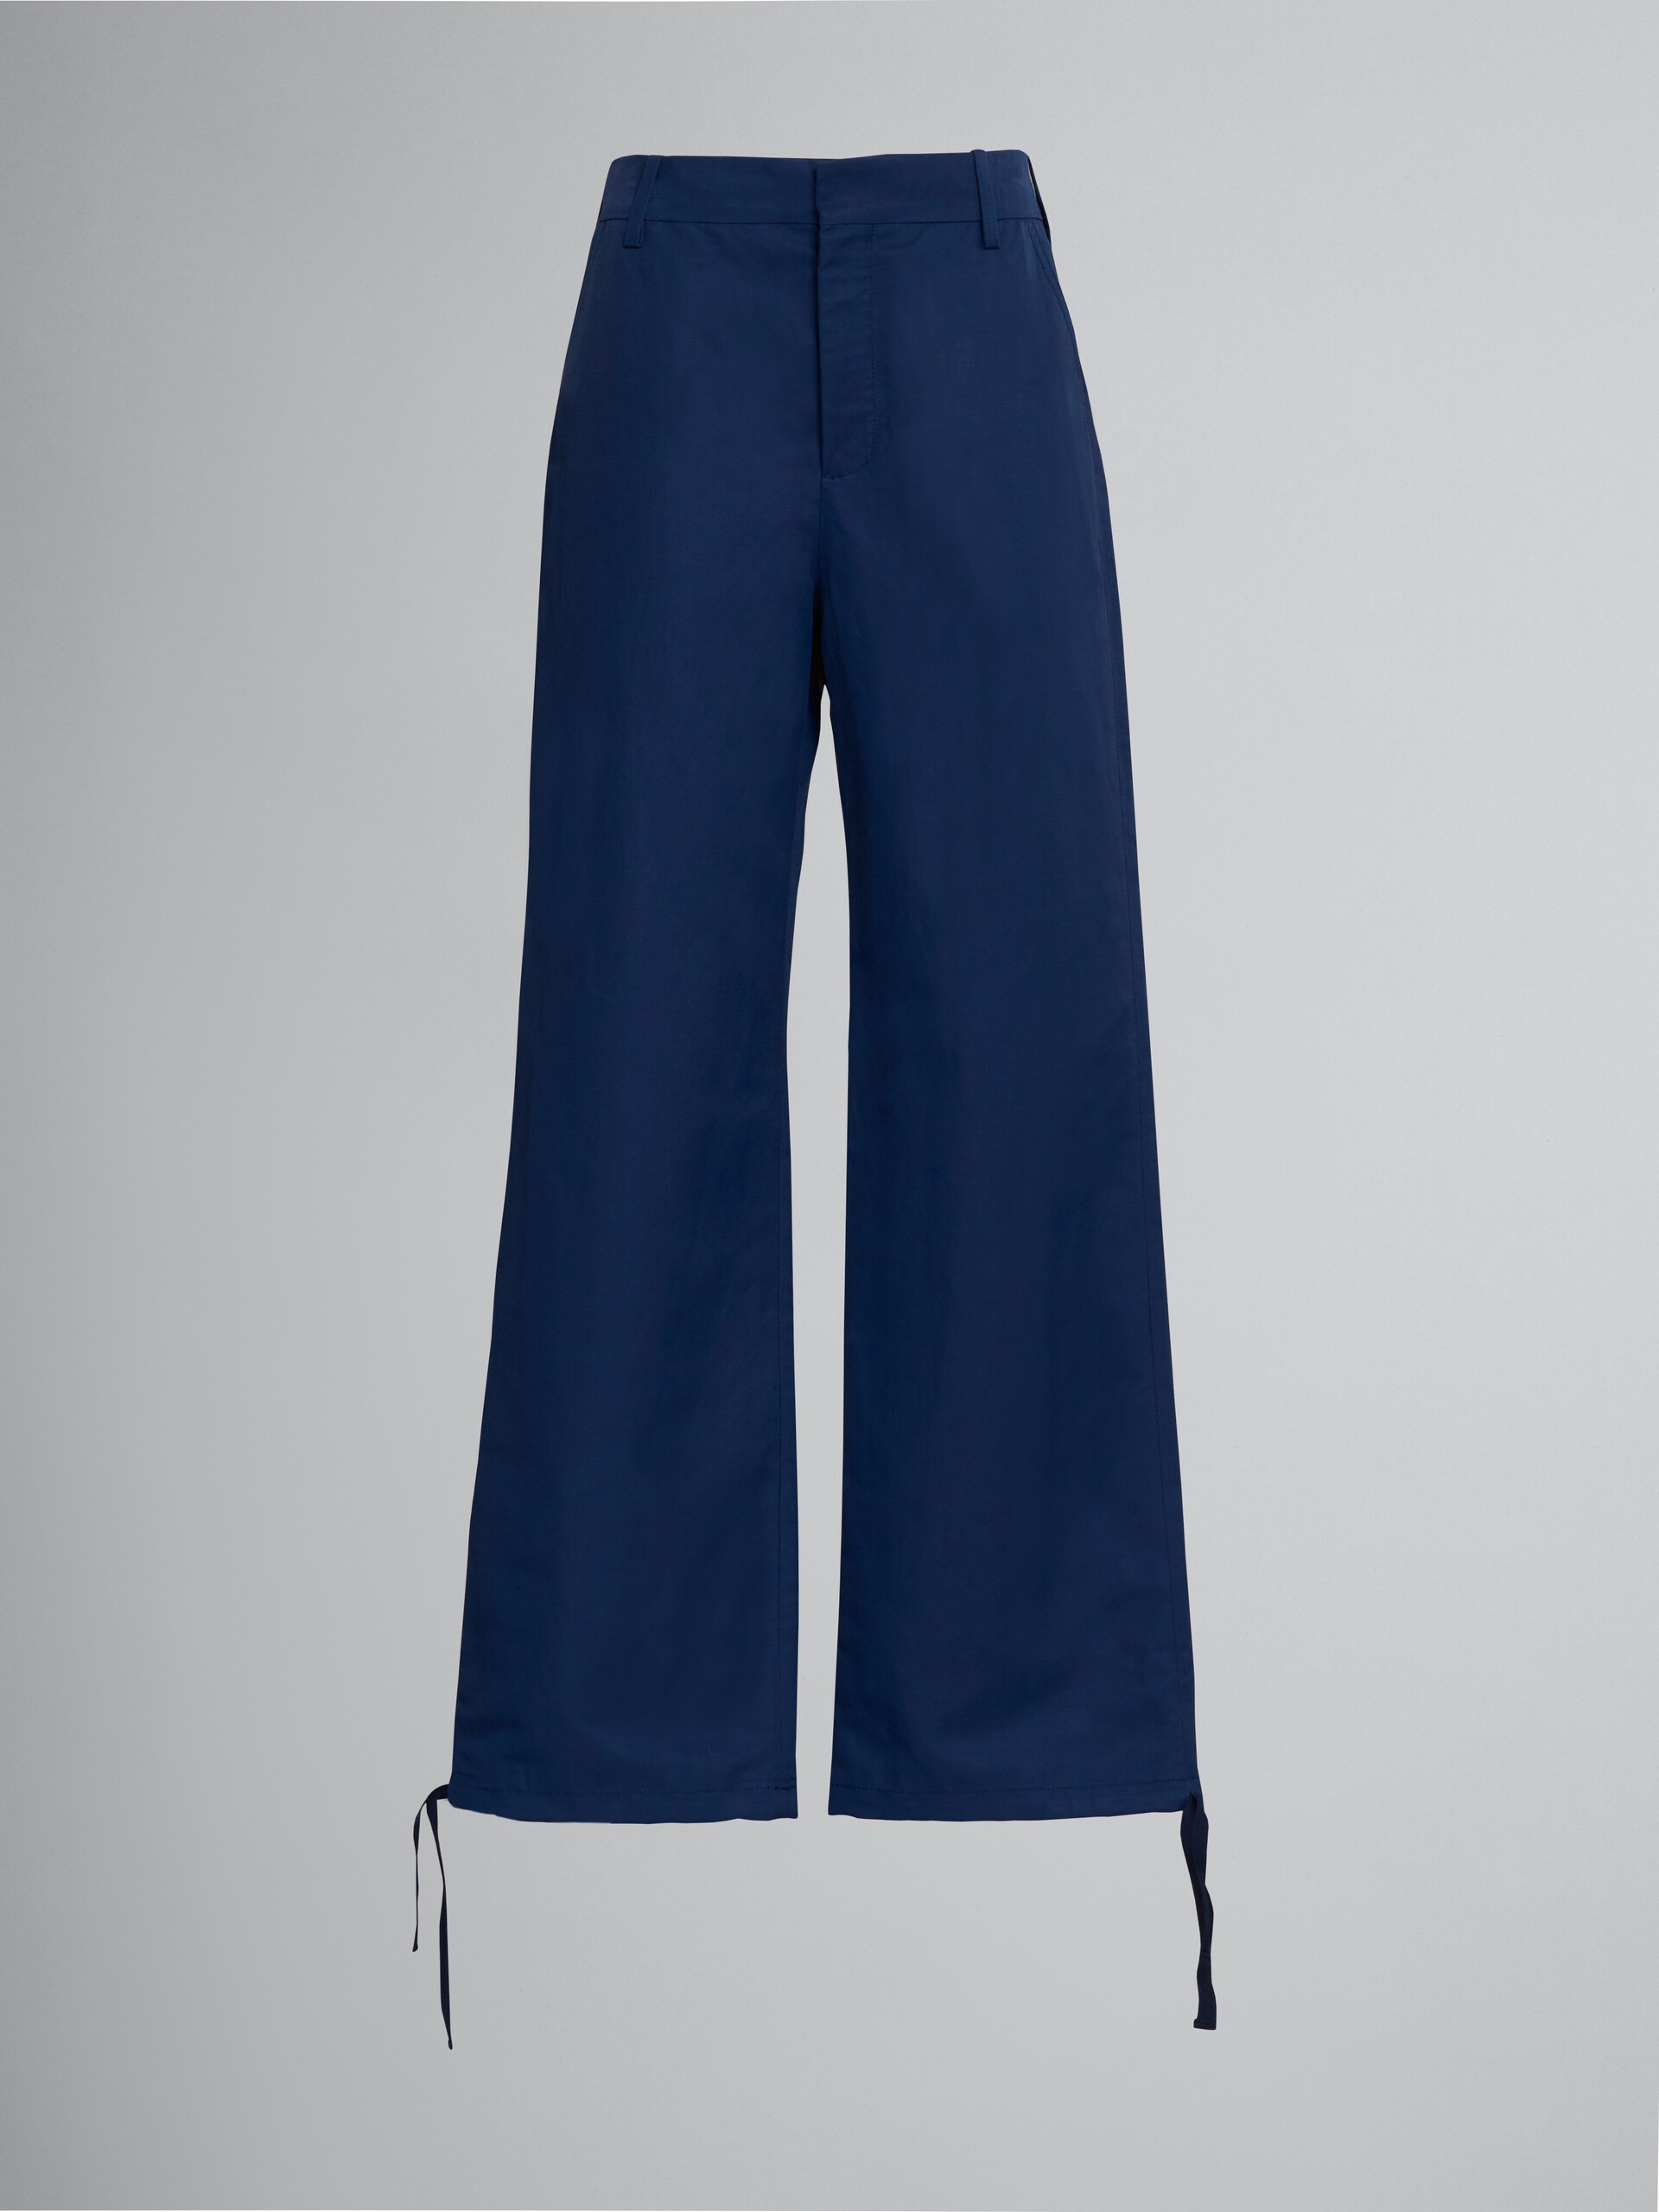 Navy cargo trousers in technical cotton-linen - Pants - Image 1